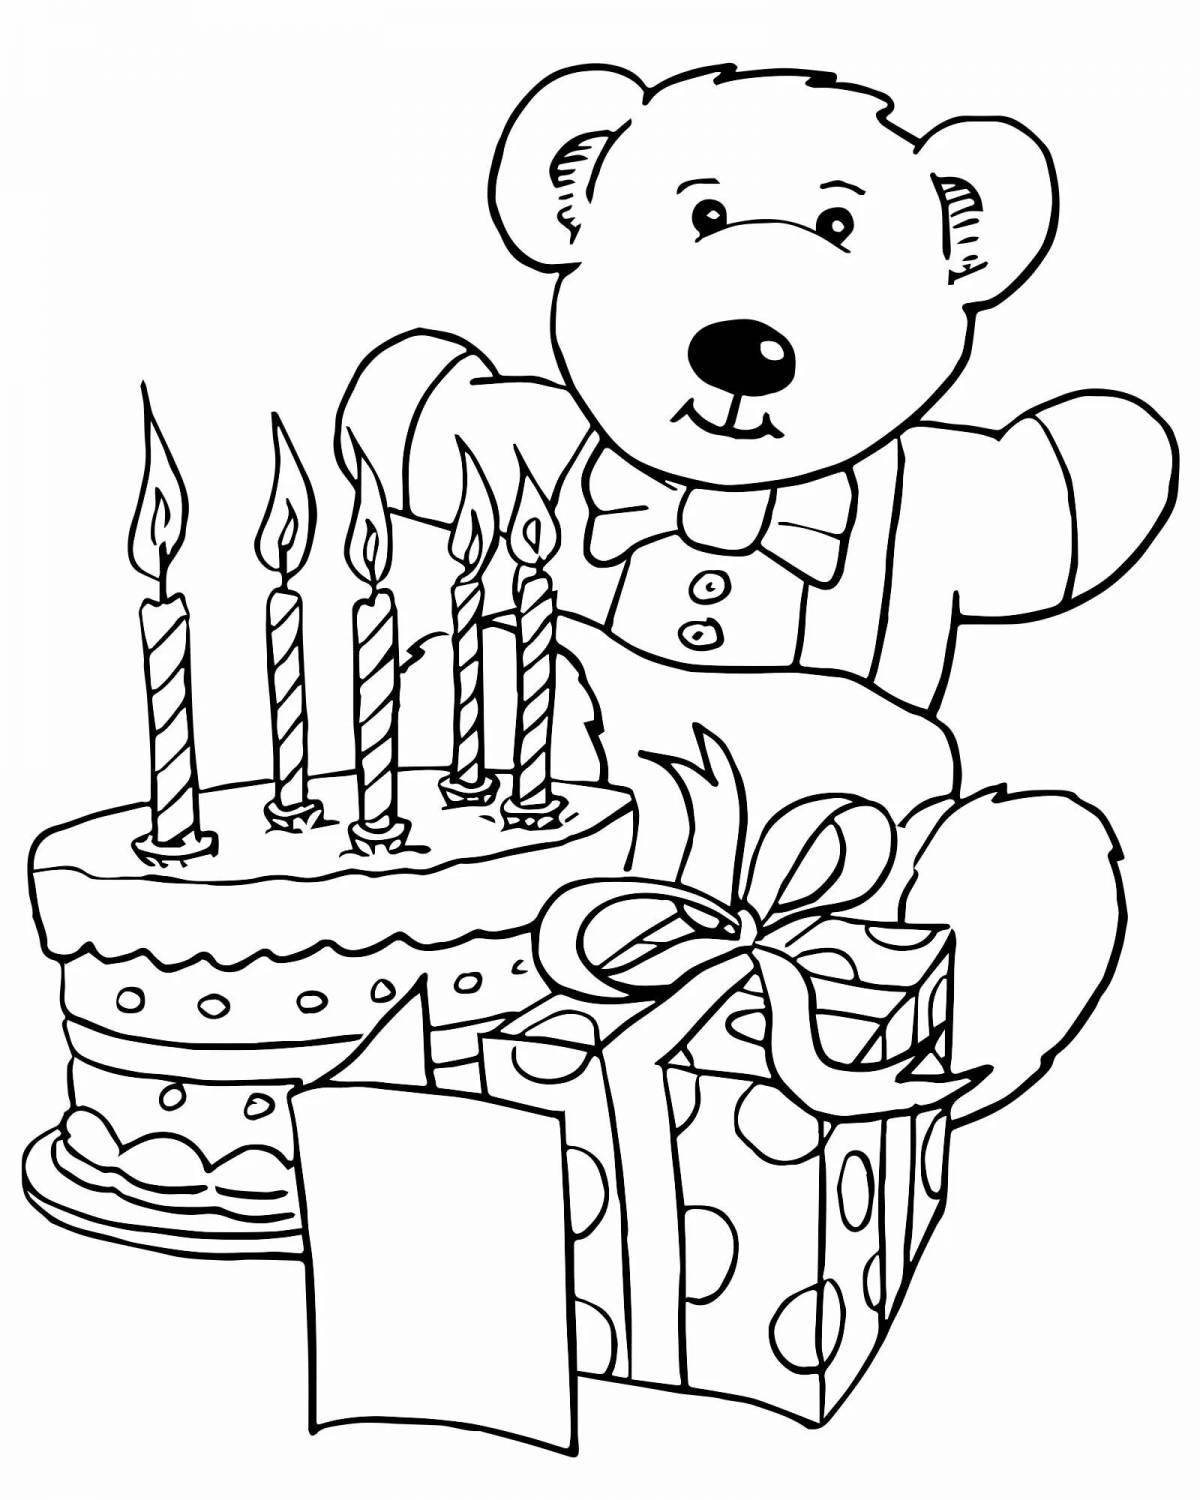 Colorful 10th birthday coloring book